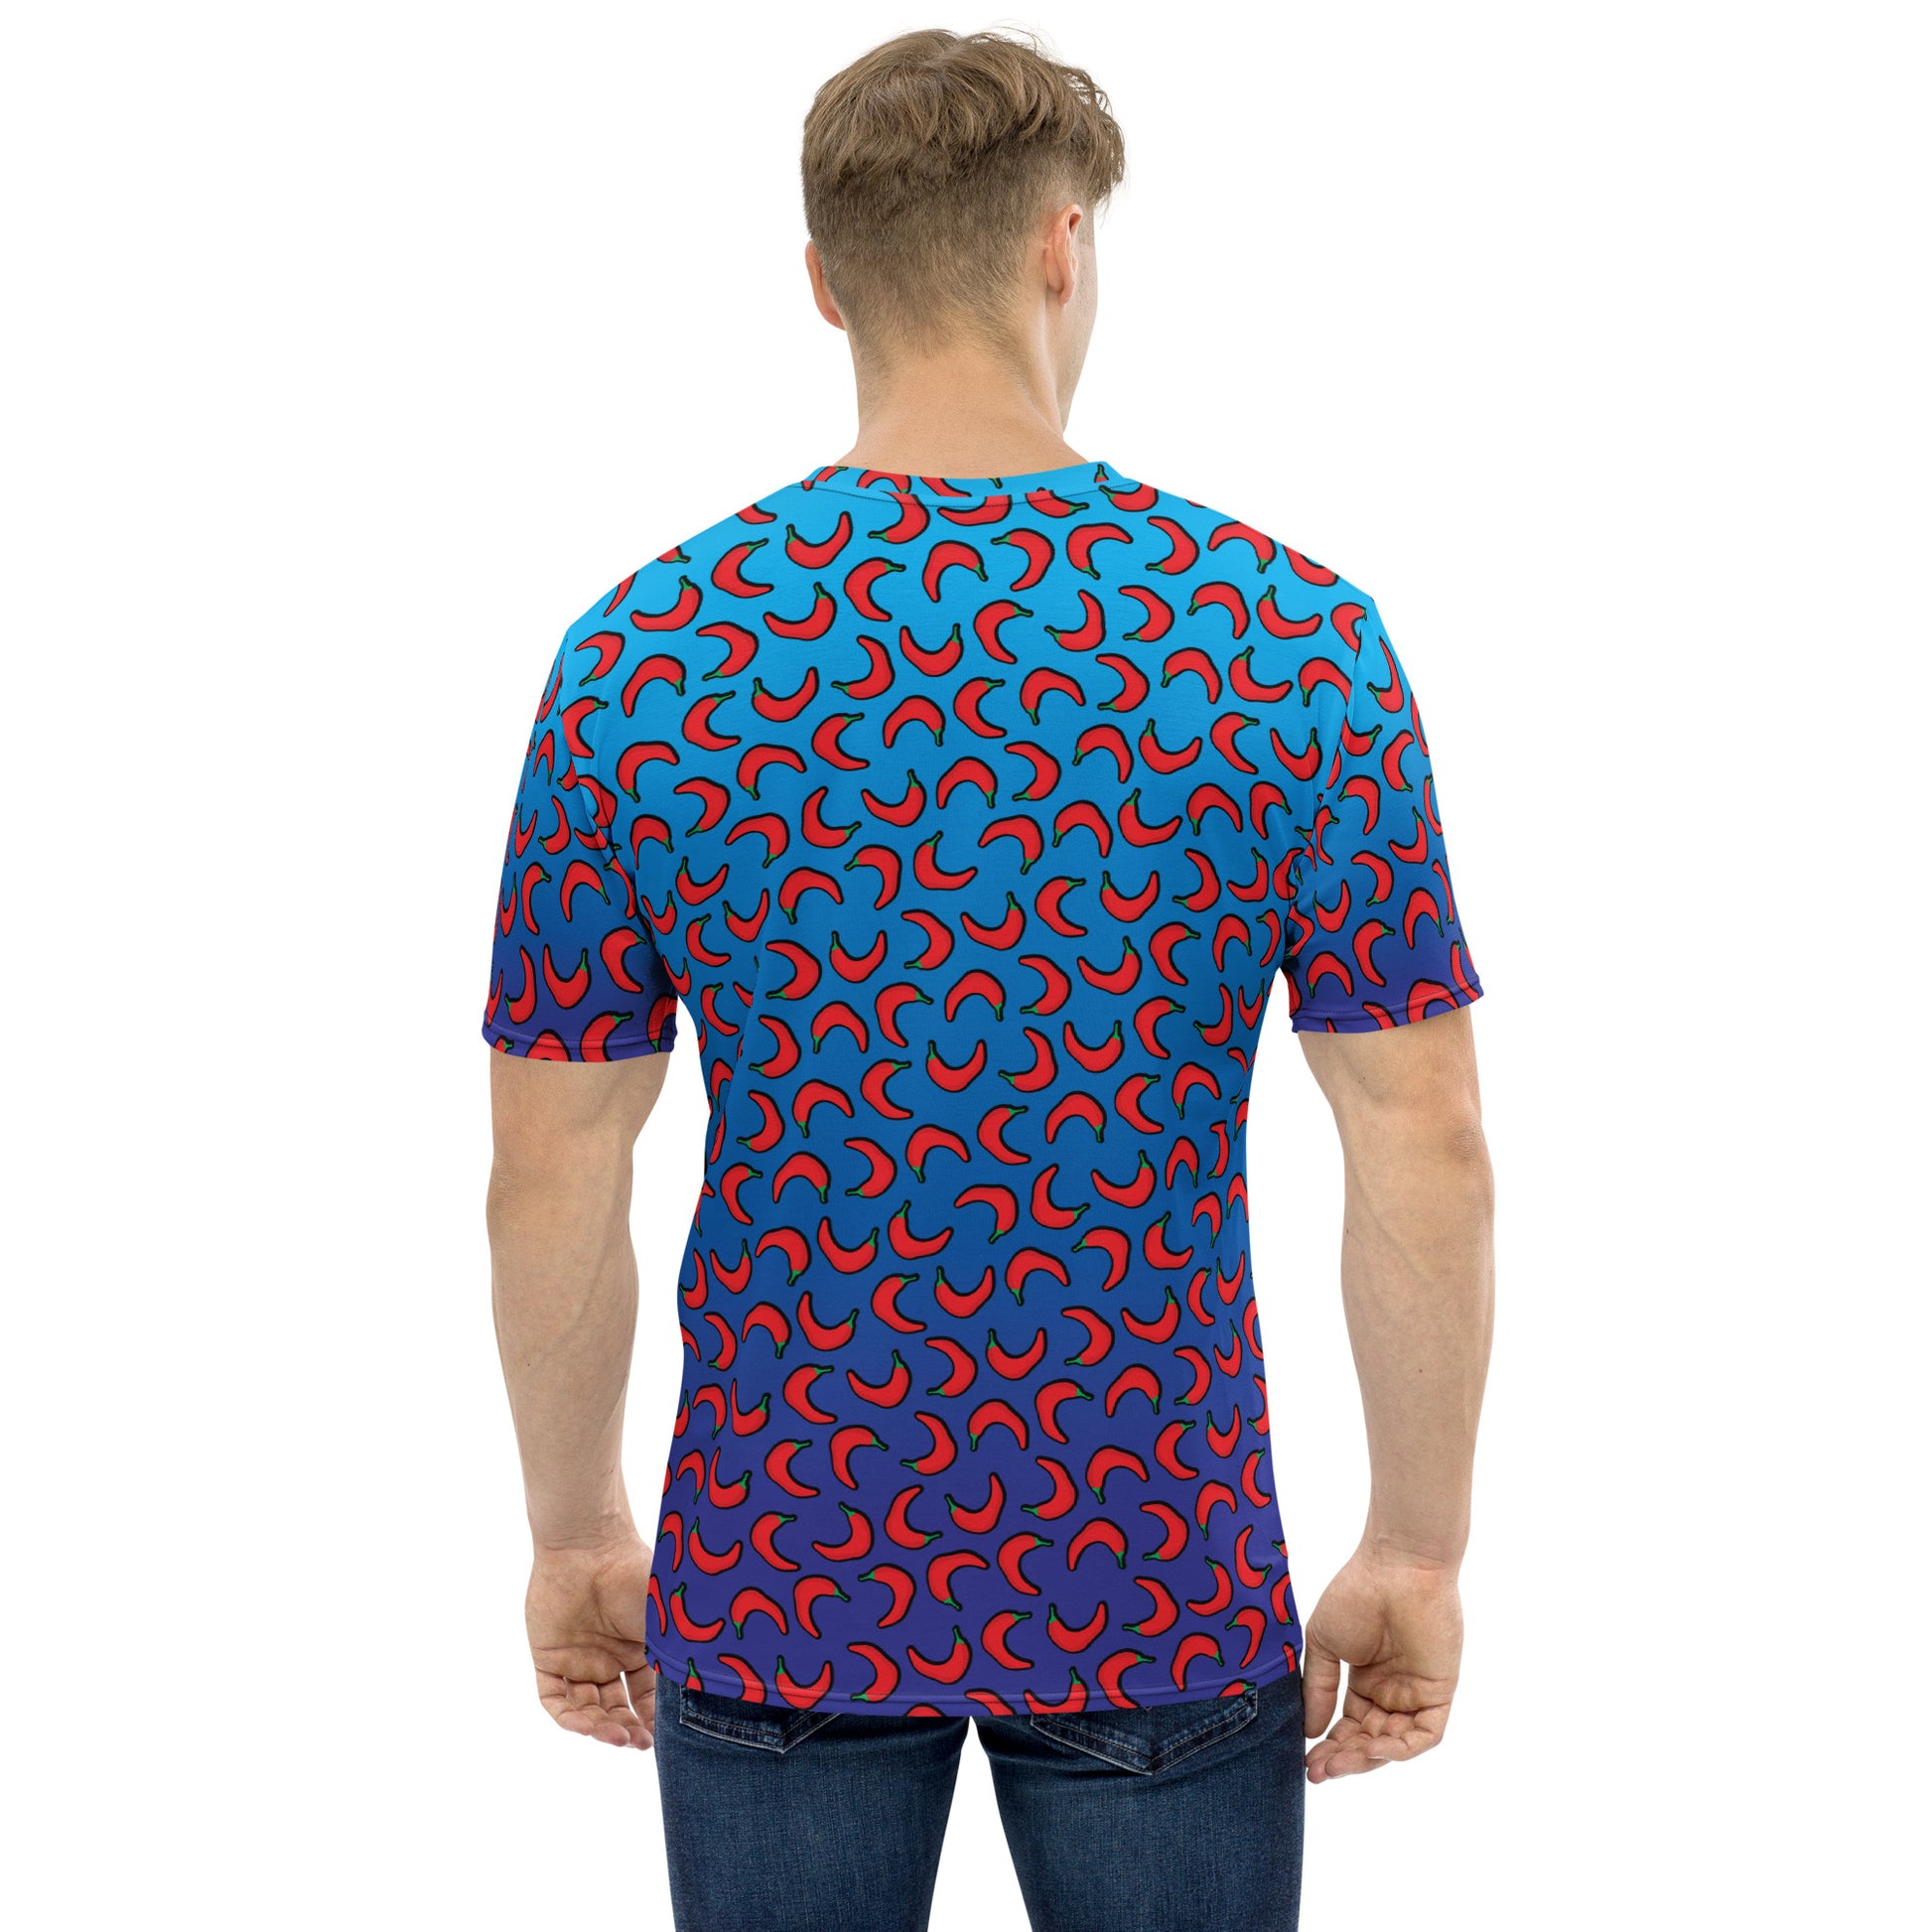 #WEIRDO | Funny t shirt man with sarcastic meme. This blue t shirt for men has contrasting red peppers printed on the shirt and our fun meme; Extremely Hot Weirdo printed at the back.